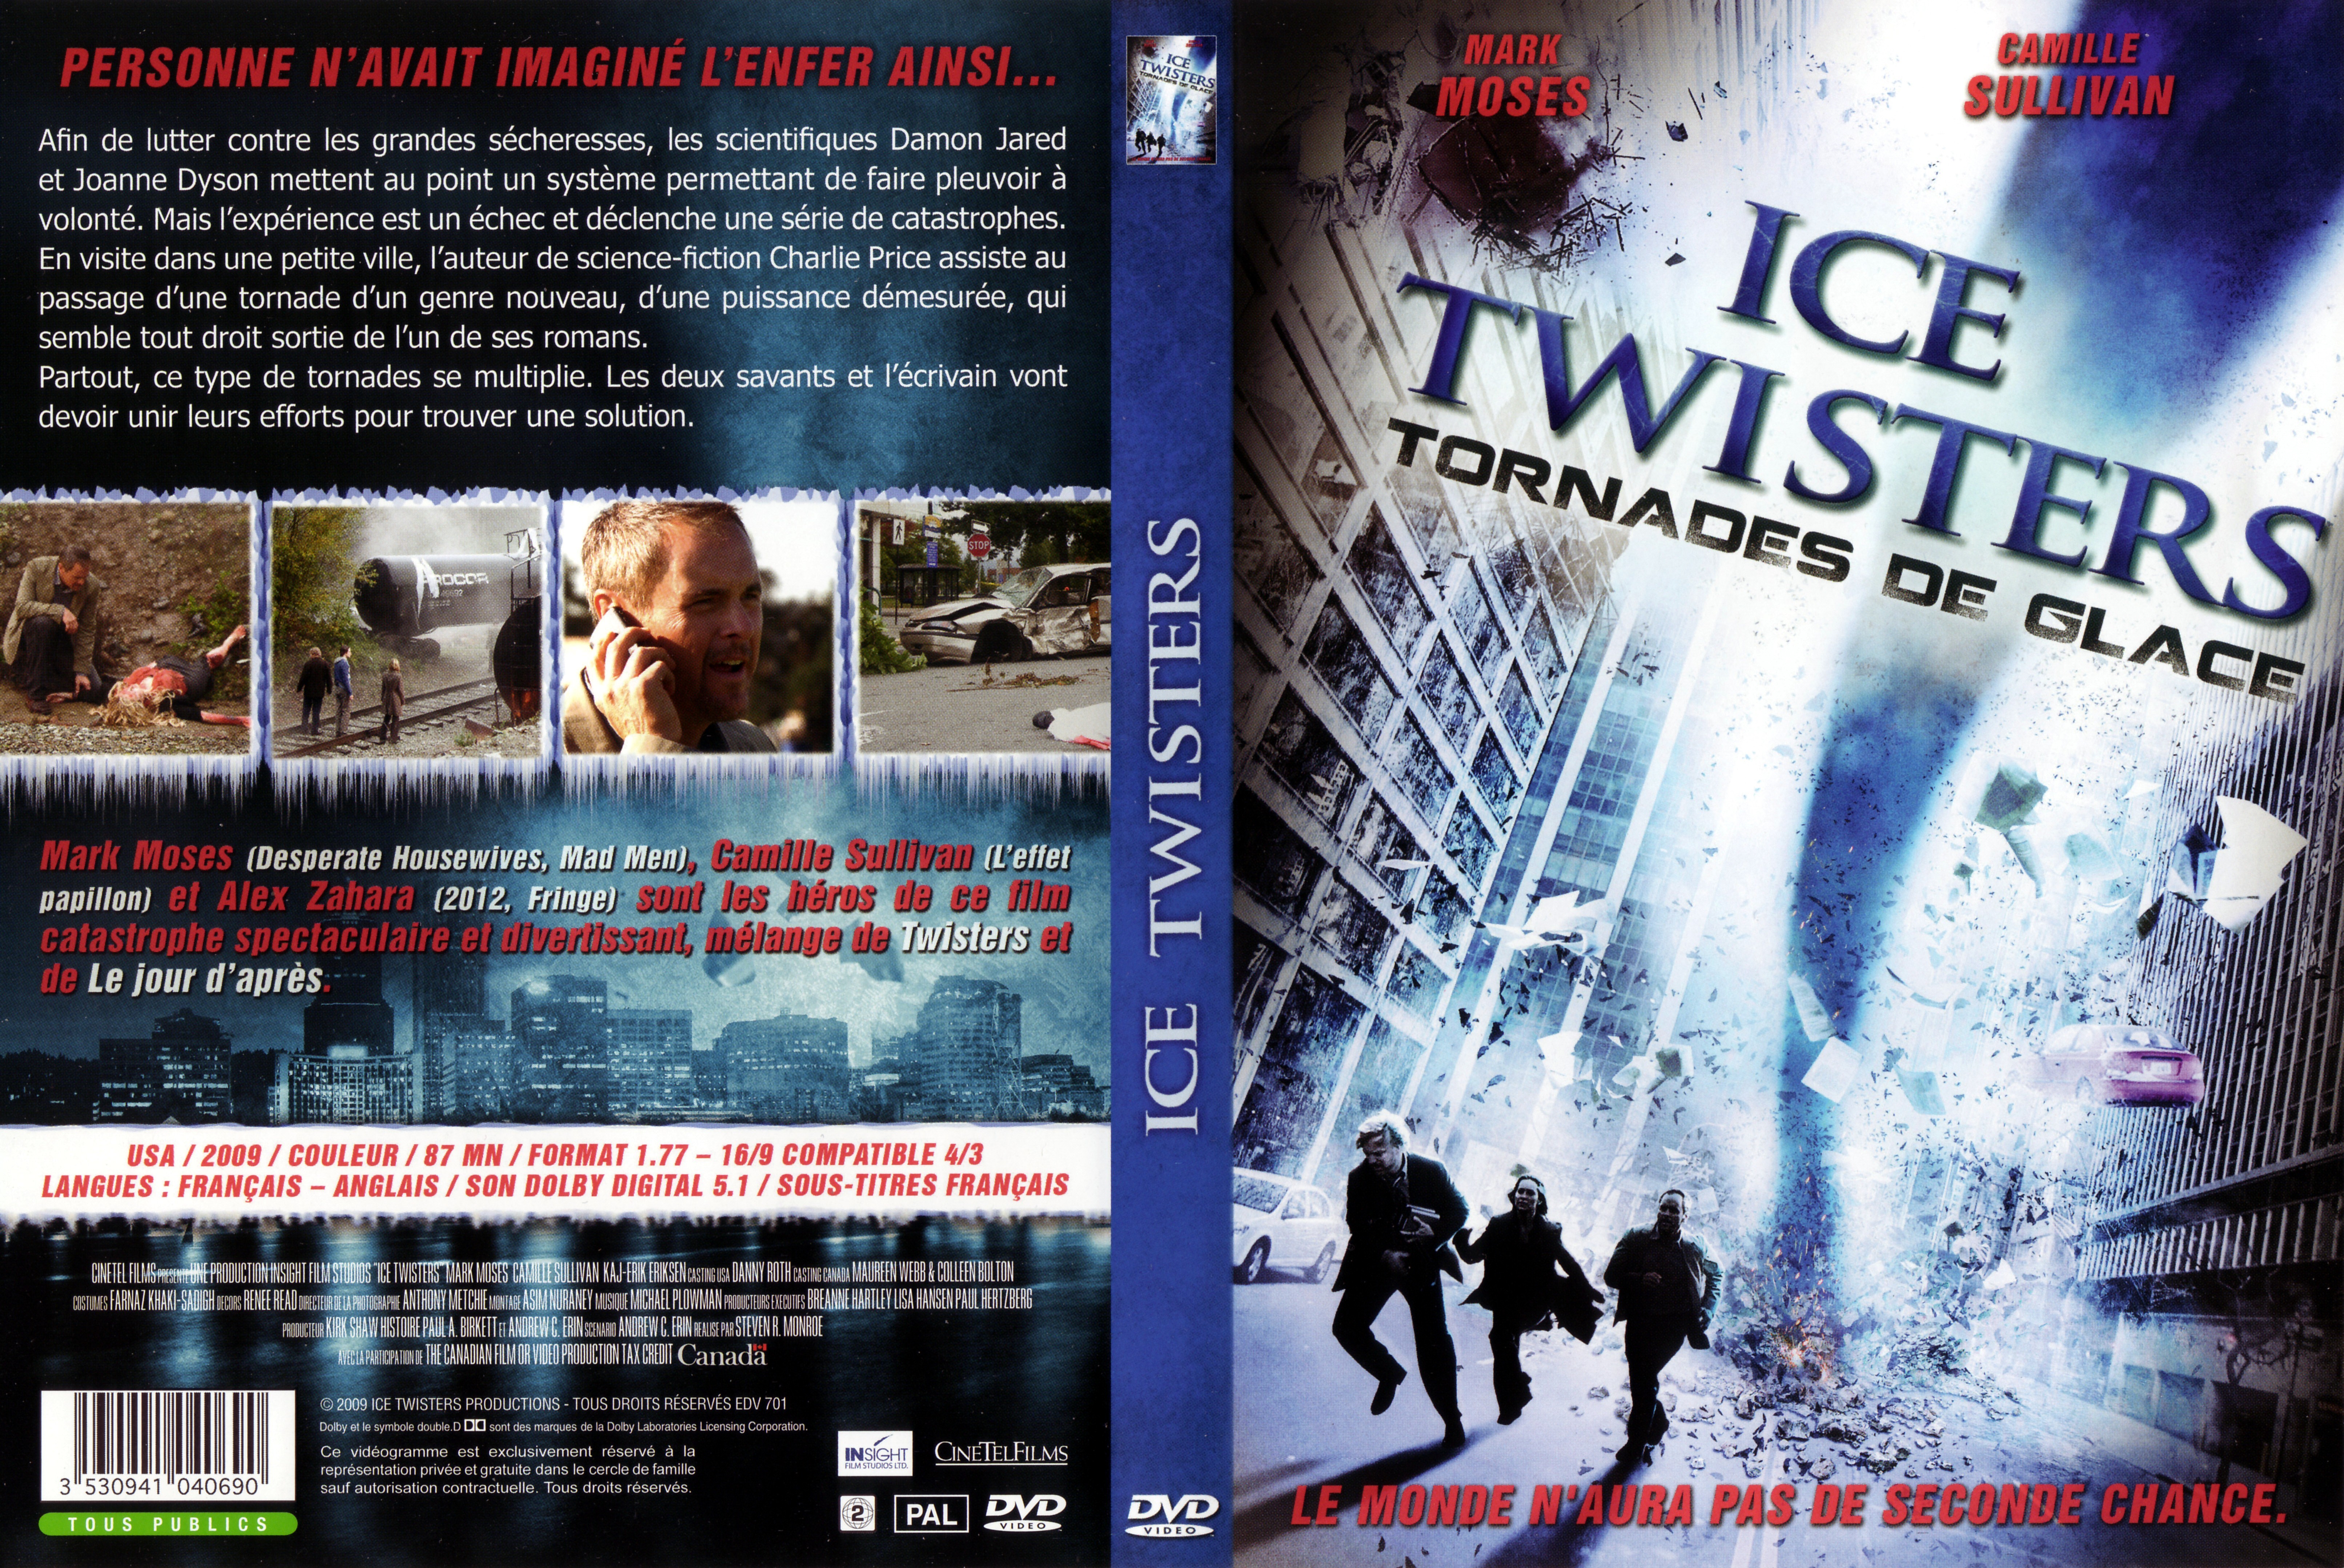 Jaquette DVD Ice twisters